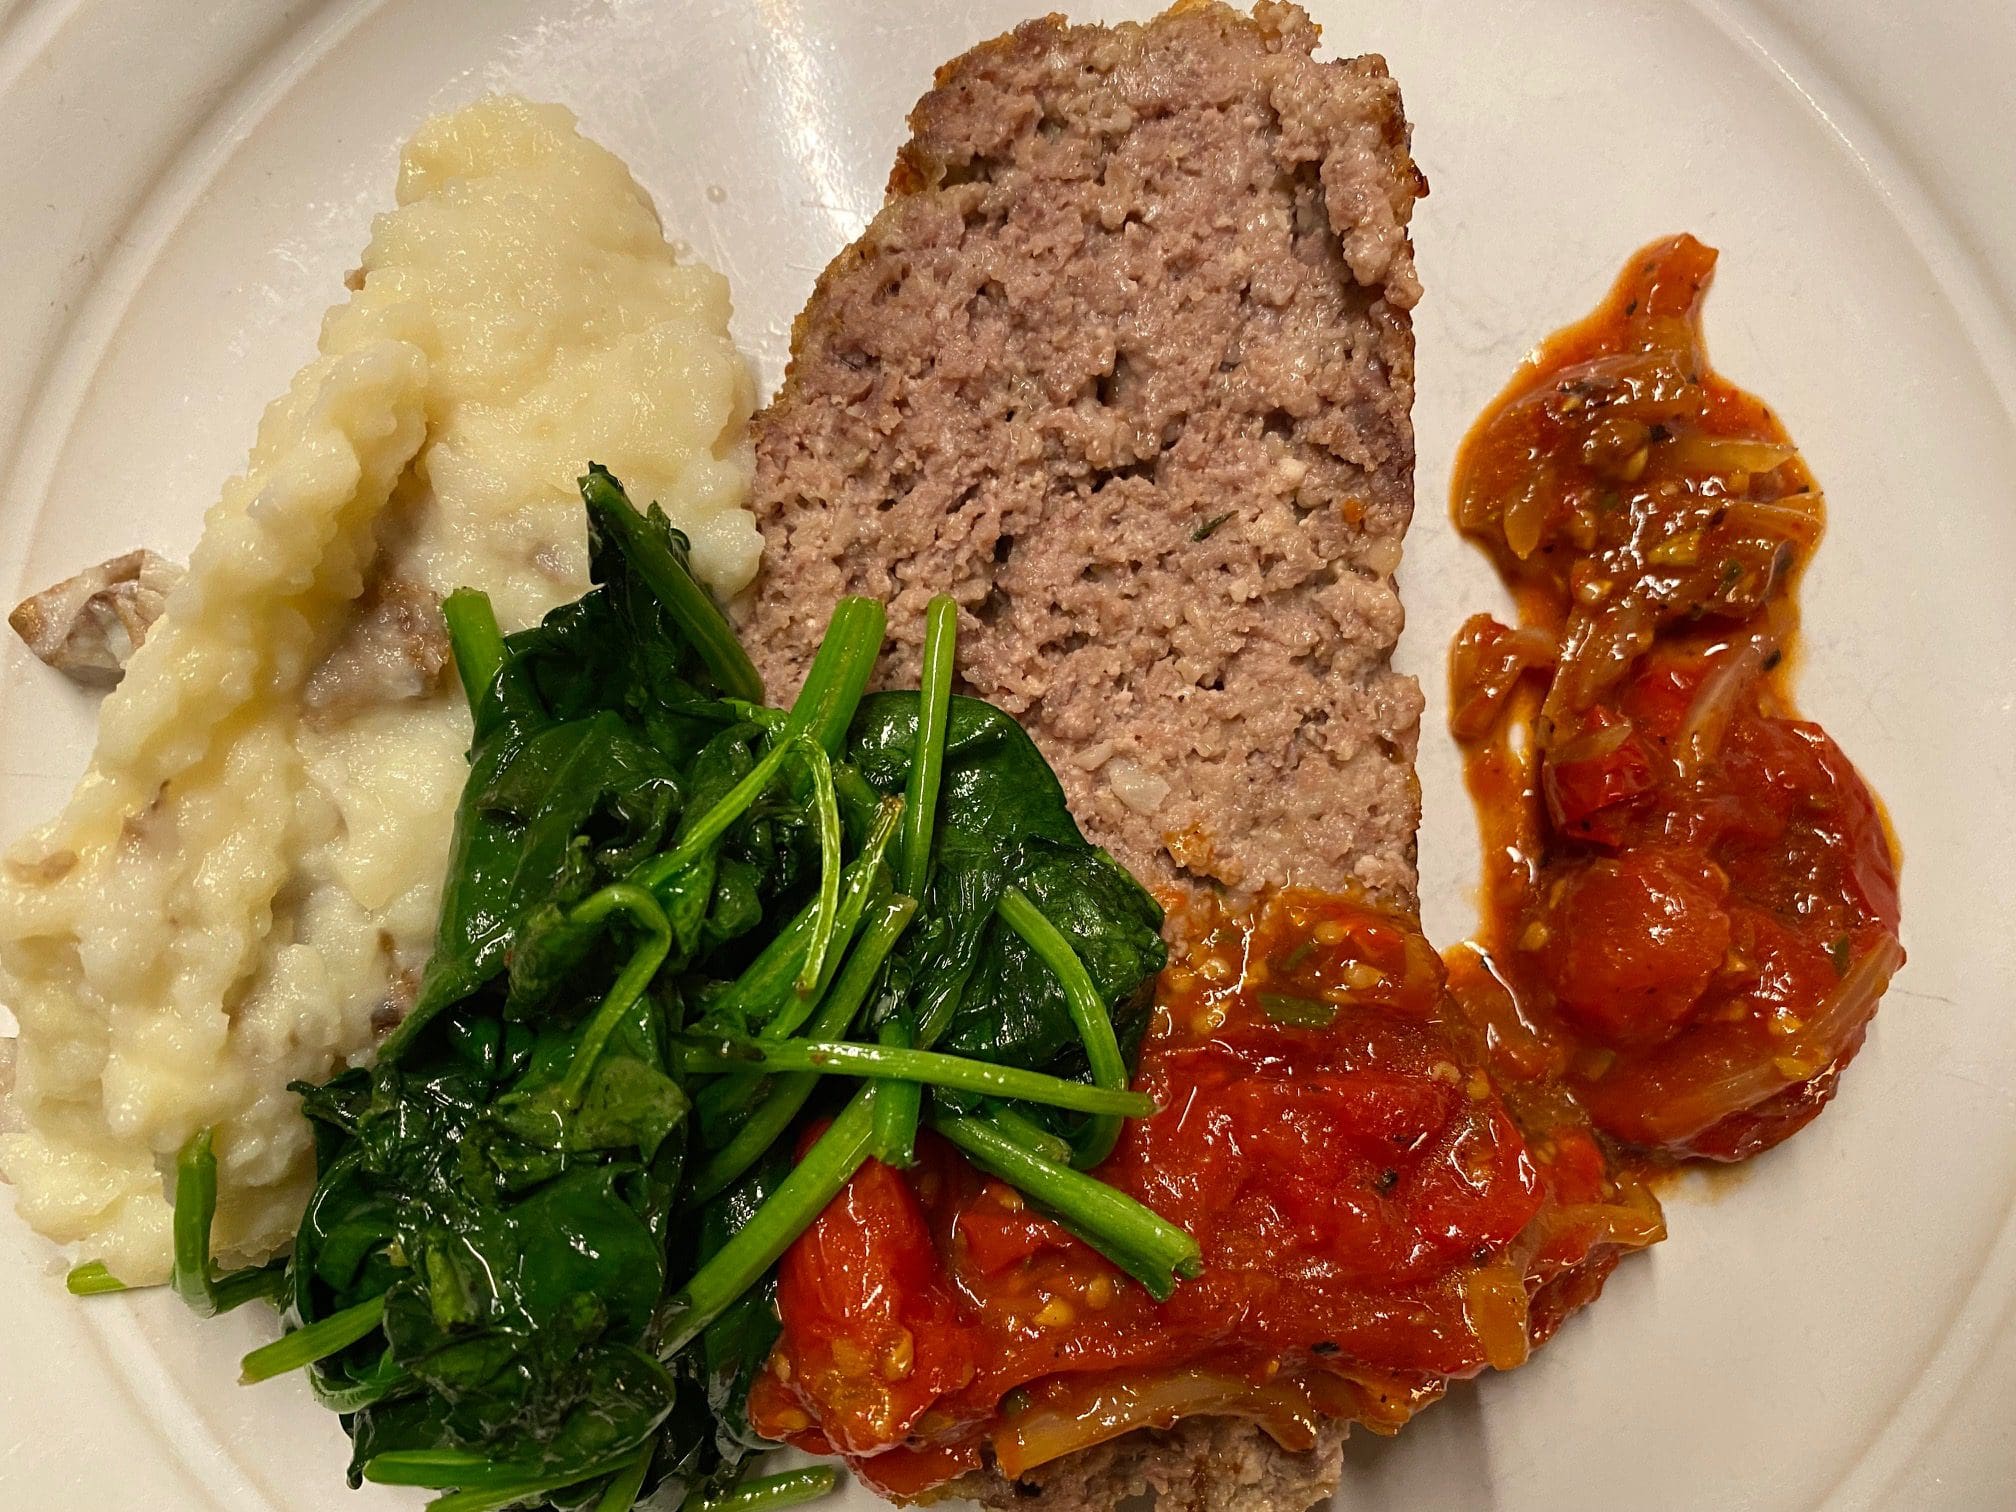 Grass fed beef meatloaf with tomato relish on a plate.